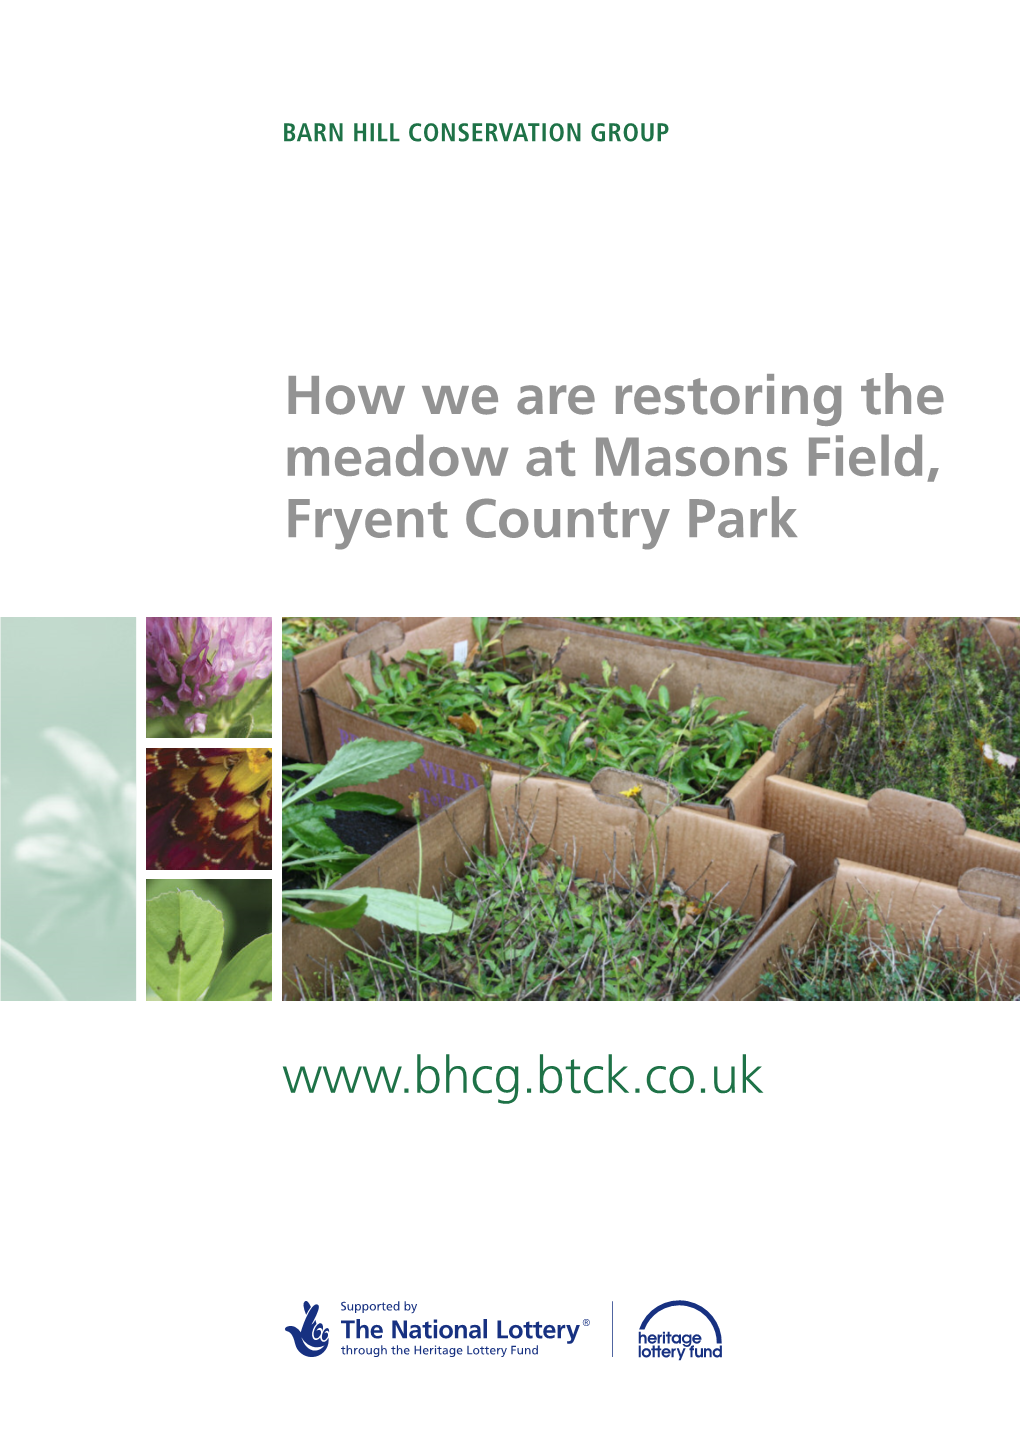 How We Are Restoring the Meadow at Masons Field, Fryent Country Park